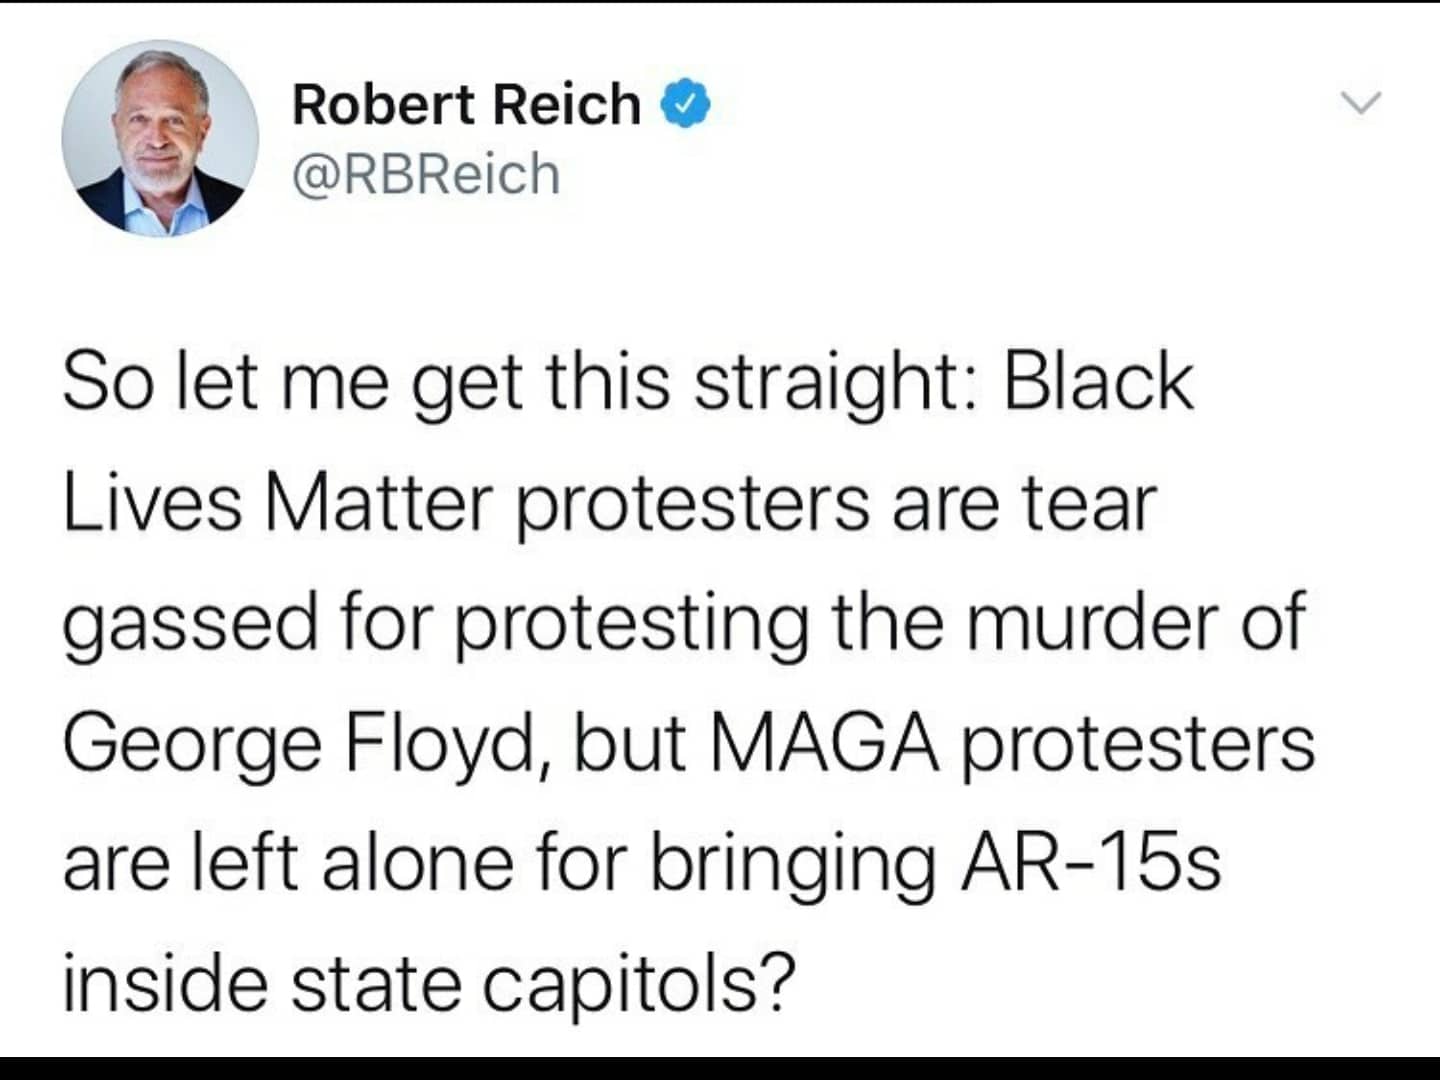 Political, BLM, George Floyd, Peaceful, Michigan, Black Panthers Political Memes Political, BLM, George Floyd, Peaceful, Michigan, Black Panthers text: Robert Reich -3 @RBReich So let me get this straight: Black Lives Matter protesters are tear gassed for protesting the murder of George Floyd, but MAGA protesters are left alone for bringing AR-15s inside state capitols? 